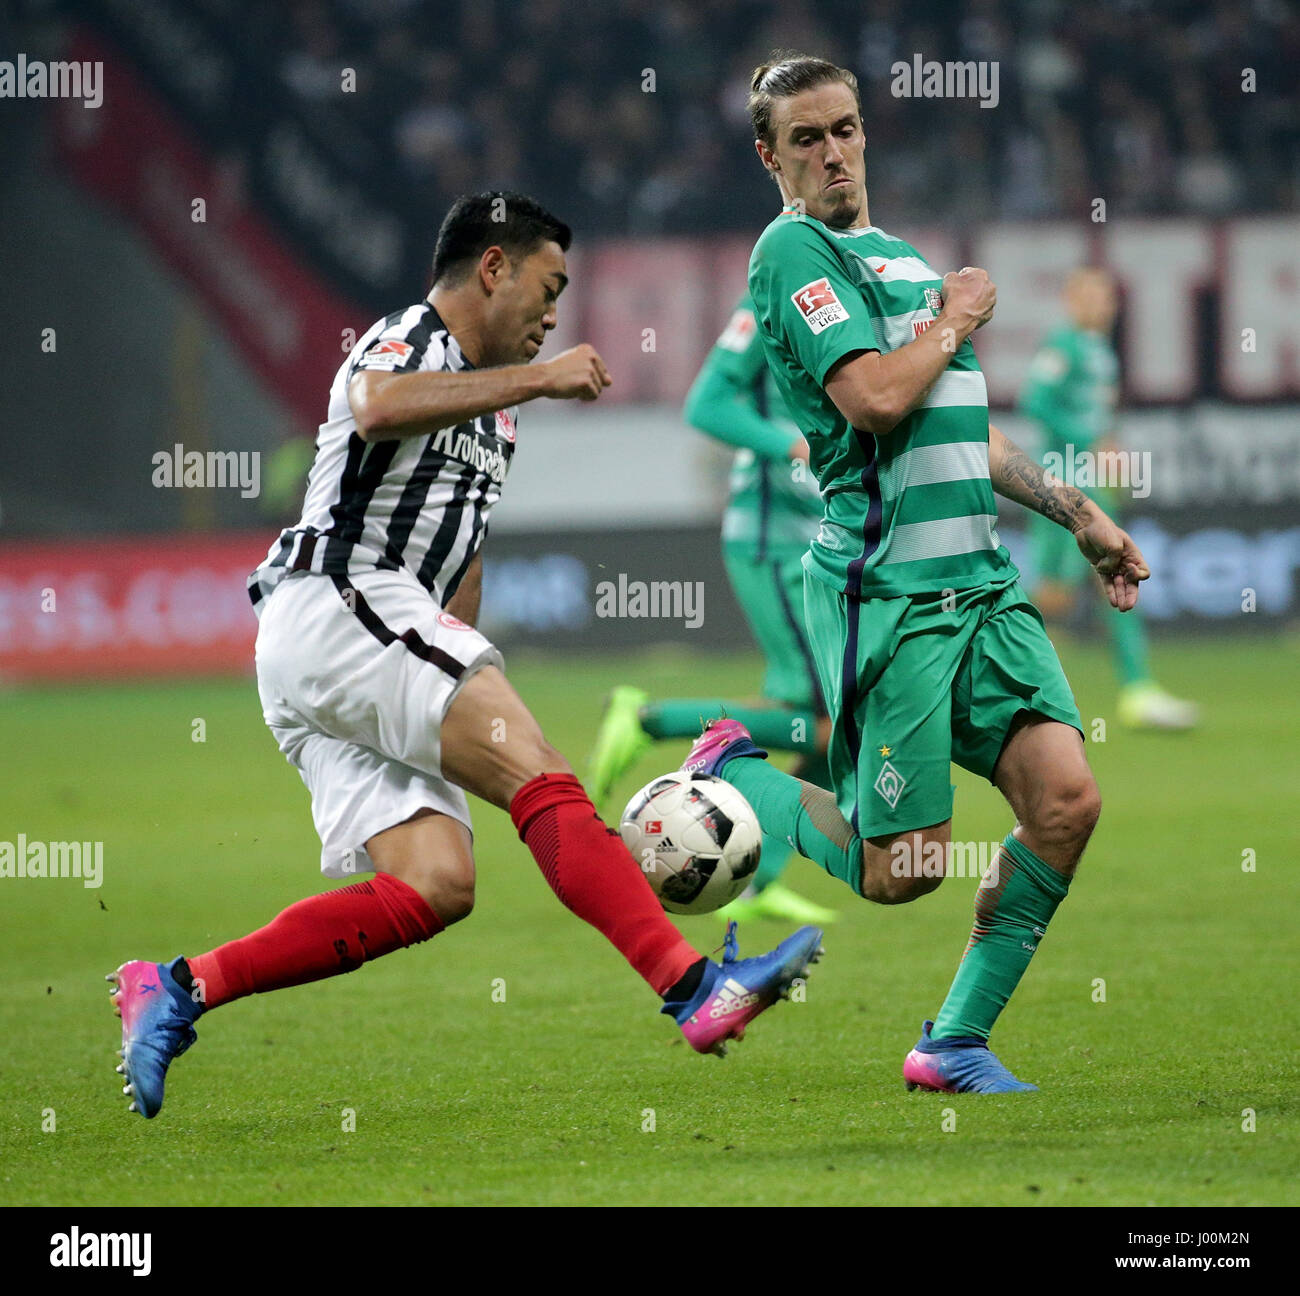 Frankfurt's Marco Fabian (L) and Bremen's Max Kruse (R) vie for the ball during the German Bundesliga soccer match between Eintracht Frankfurt and Werder Bremen in the Commerzbank-Arena in Frankfurt am Main, Germany, 07 April 2017. Photo: Hasan Bratic/dpa Stock Photo